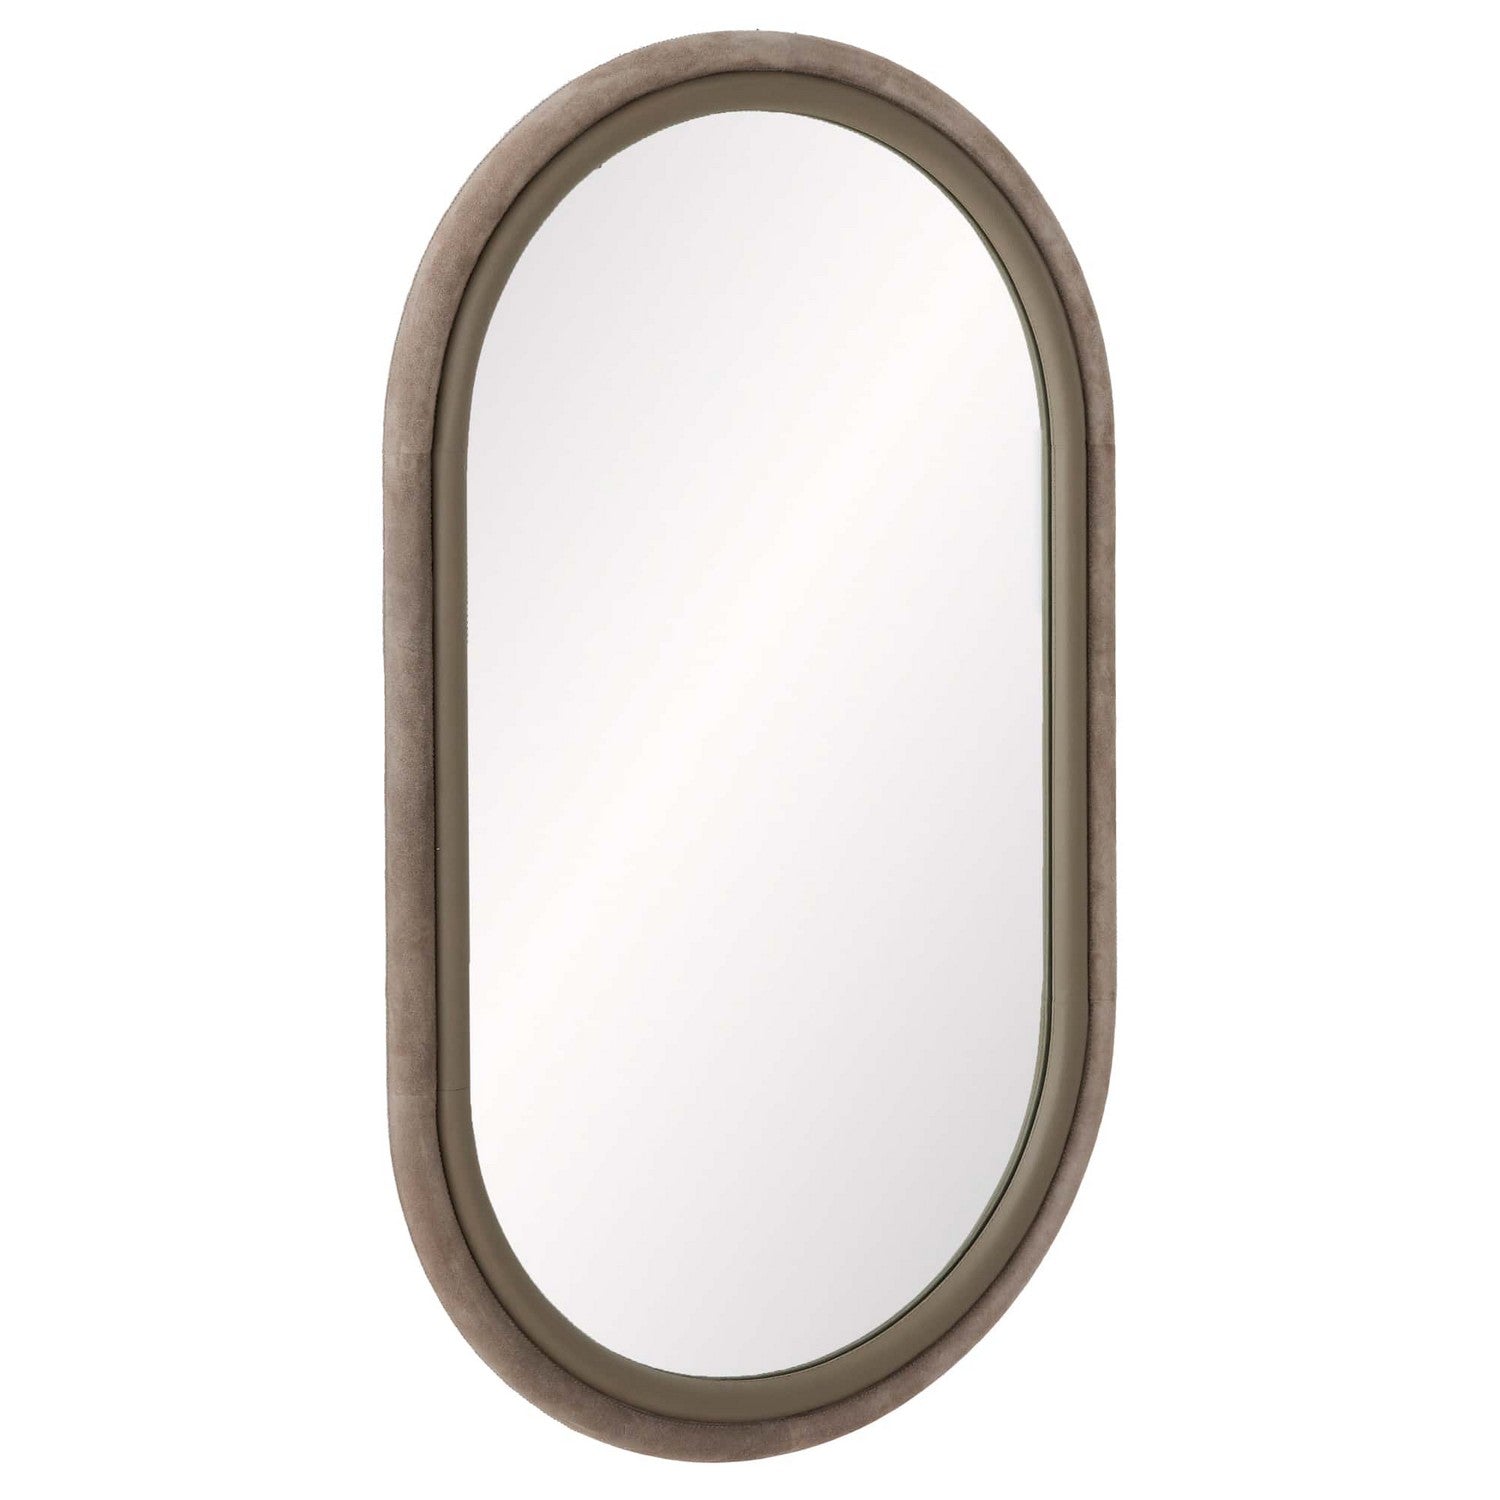 Mirror from the Weathers collection in Dove finish